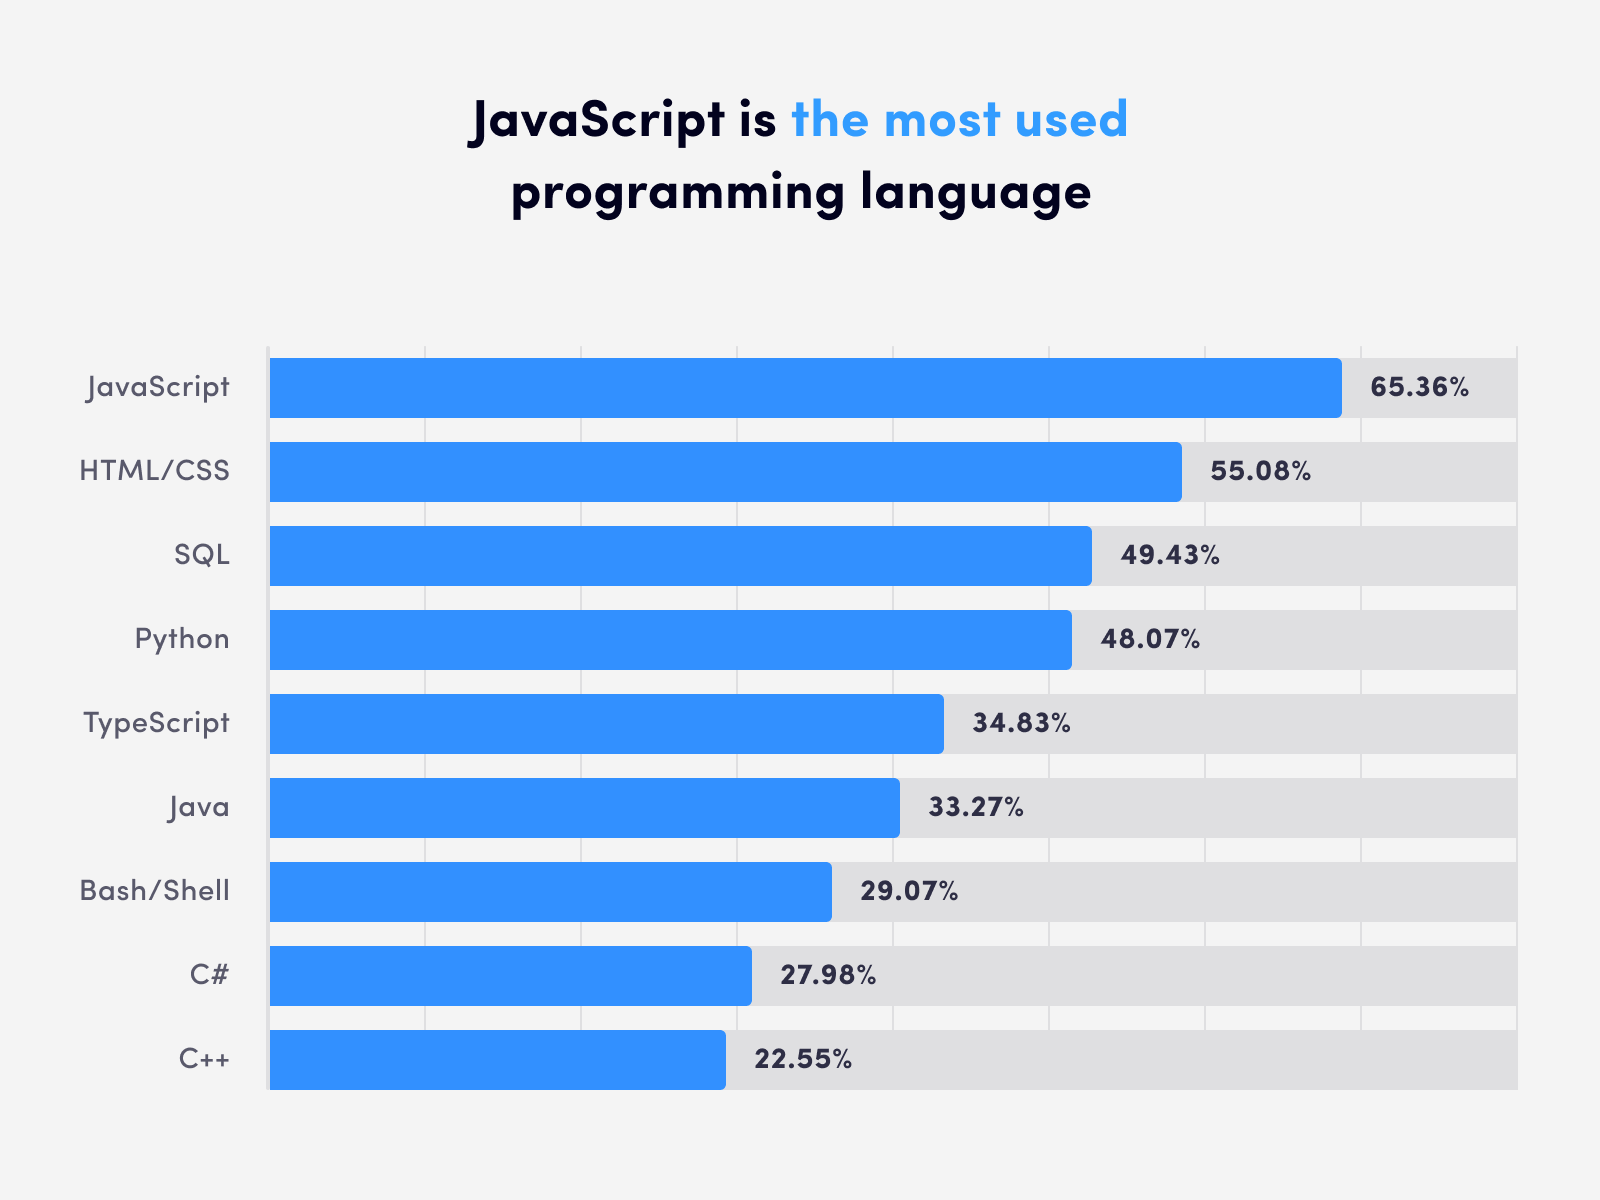 JavaScript is the most used programming language among developers worldwide as of 2021